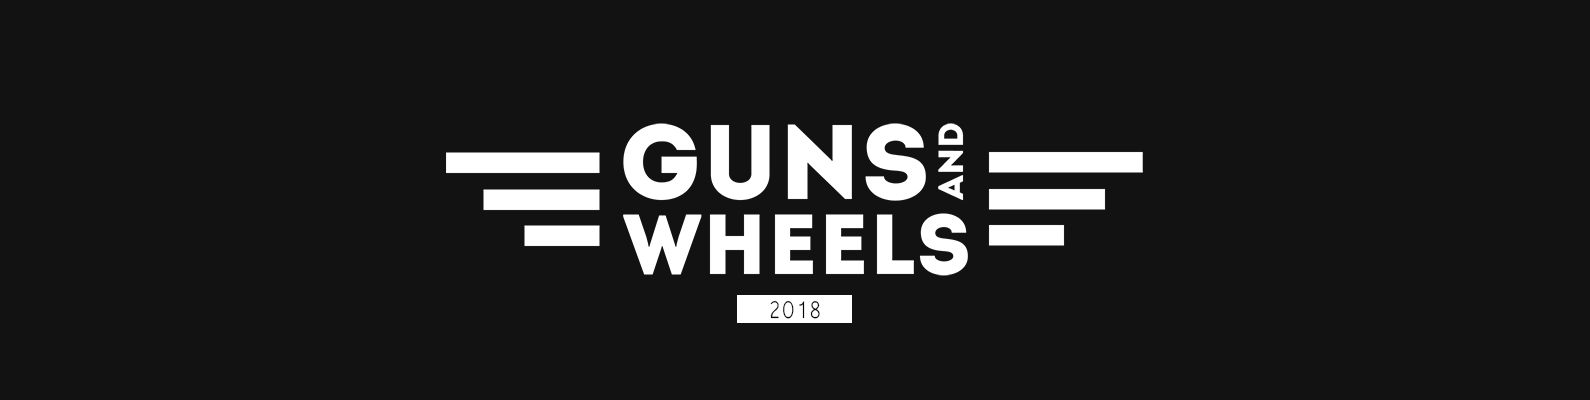 Guns and Wheels - My, Games, Computer games, Creation, Motorists, Weapon, Nuclear weapon, Show, Longpost, 